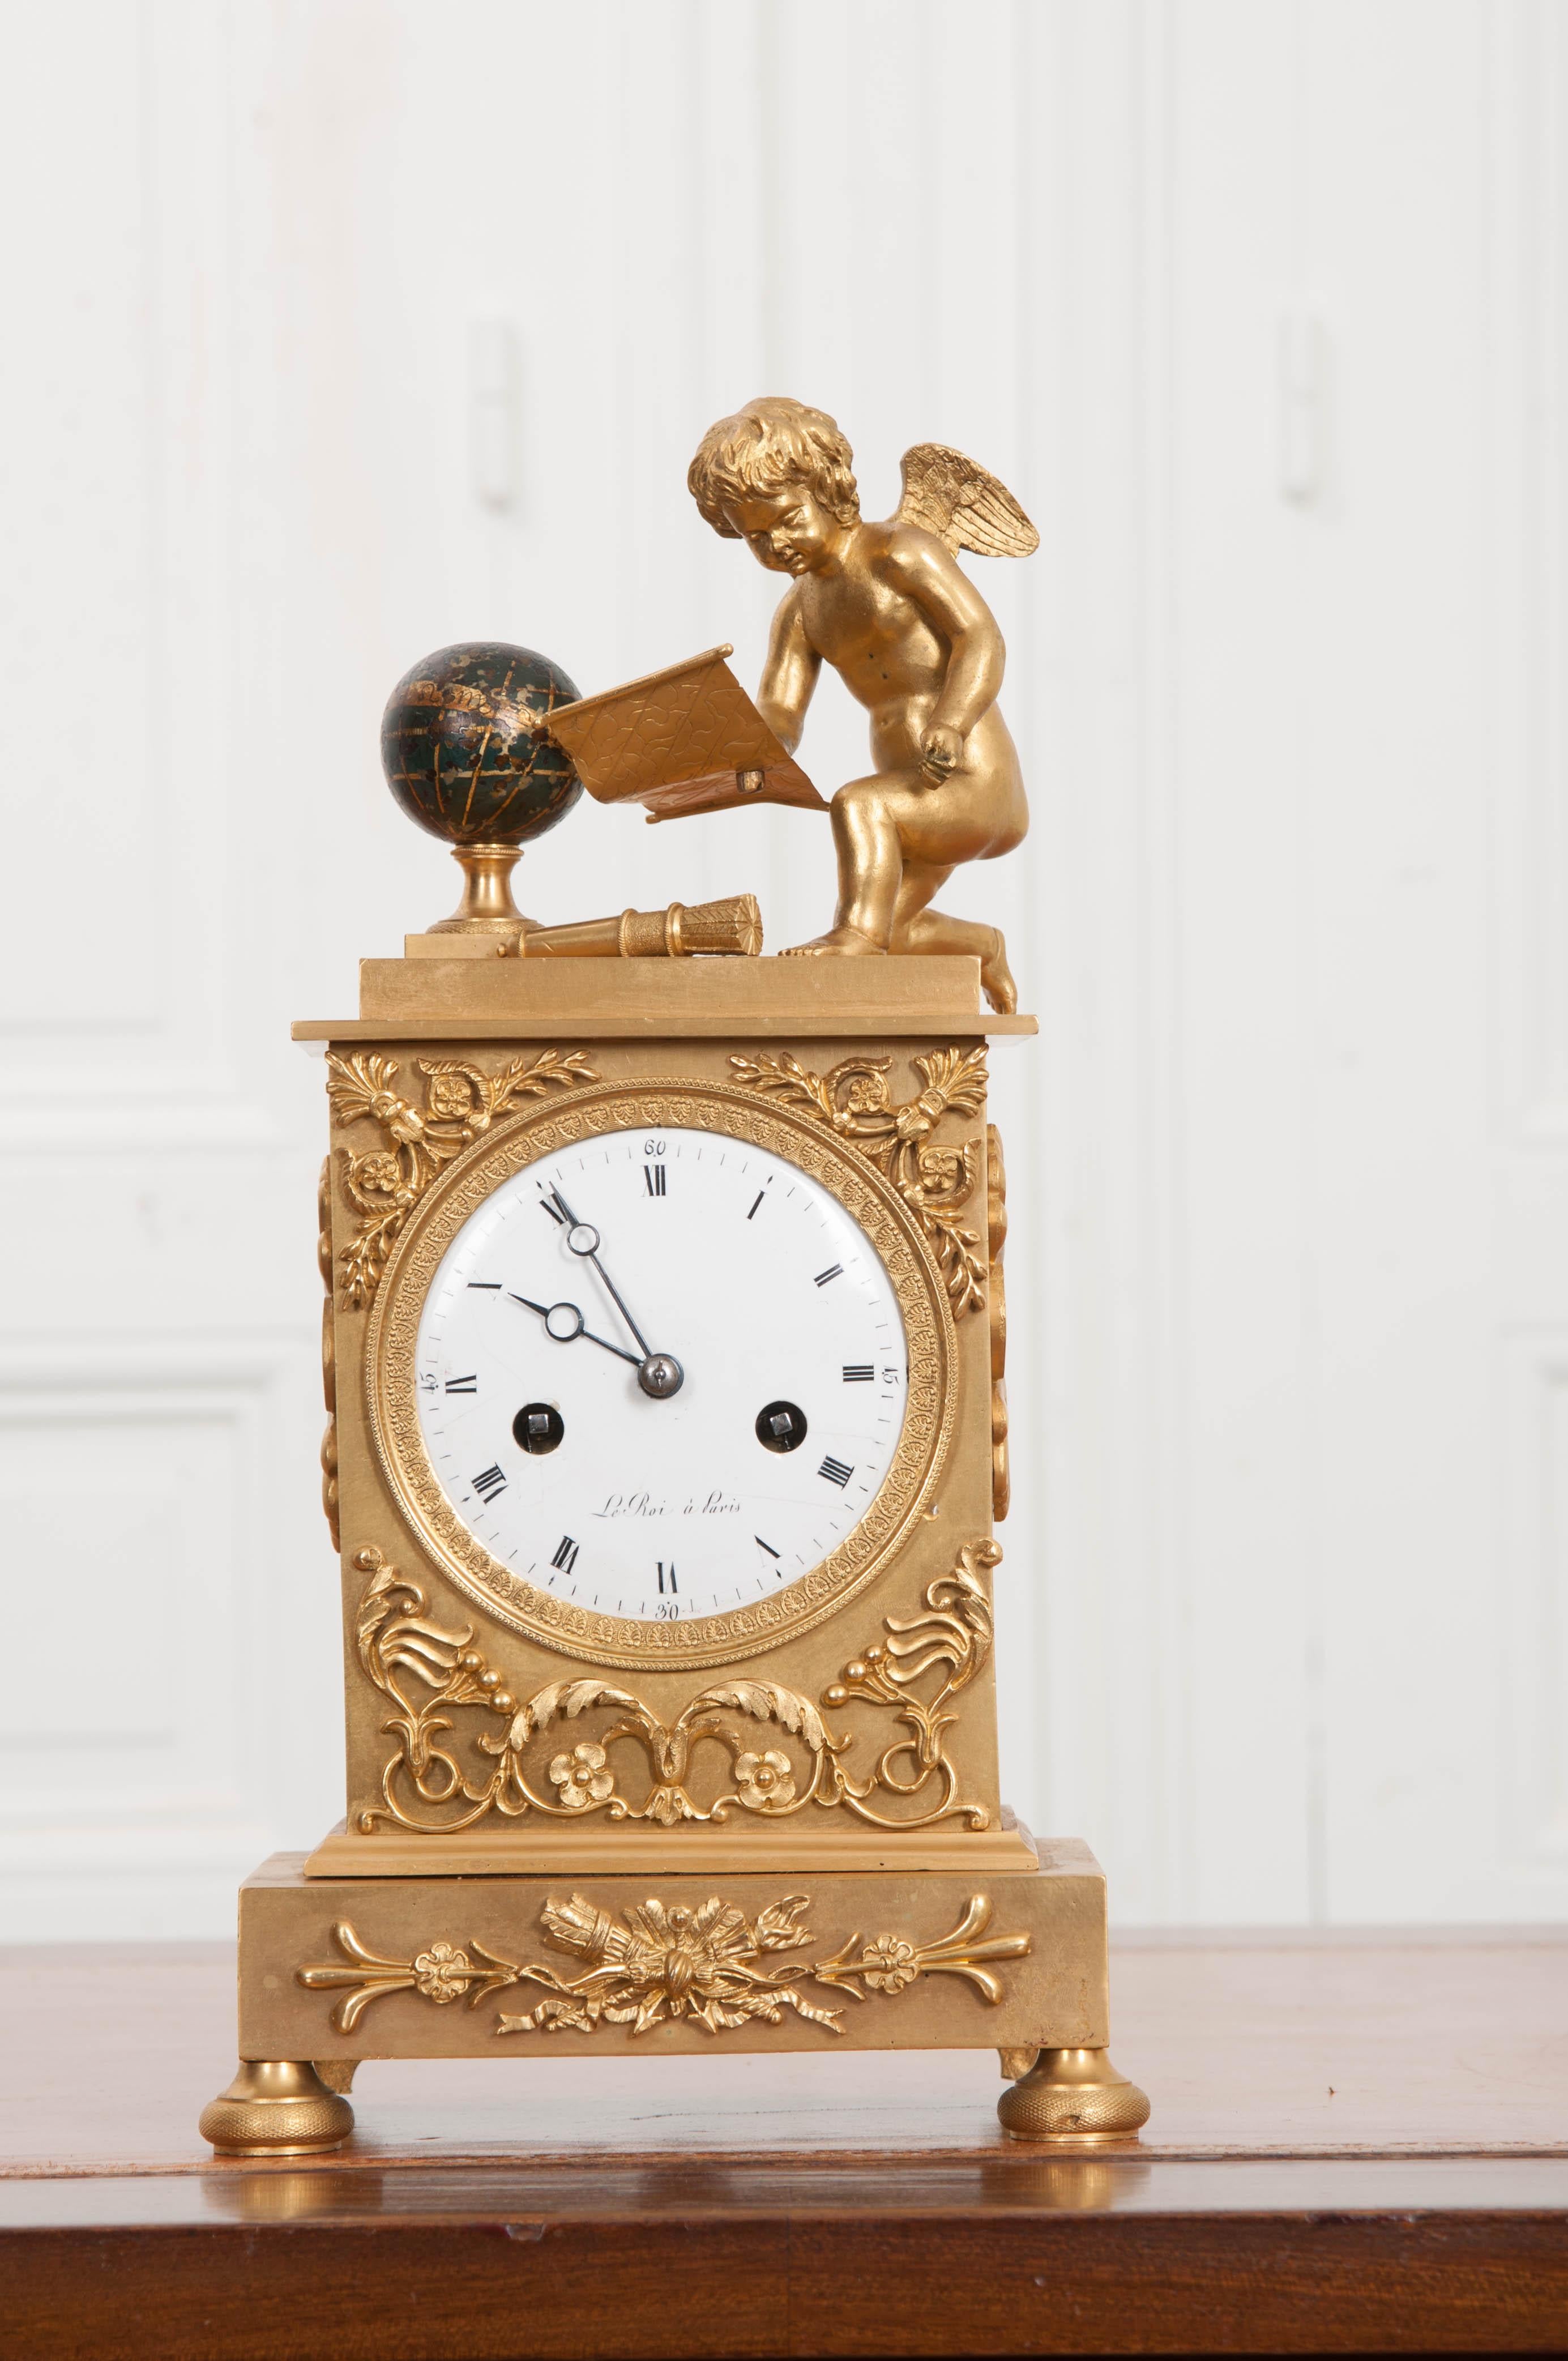 This exquisite fire-gilded bronze mantel clock was made in France, circa 1790-1800. Depicting the Arts in Astronomy, it features a winged cherub reading from a scroll with a painted bronze globe and telescope nearby. The delicate hand painted enamel